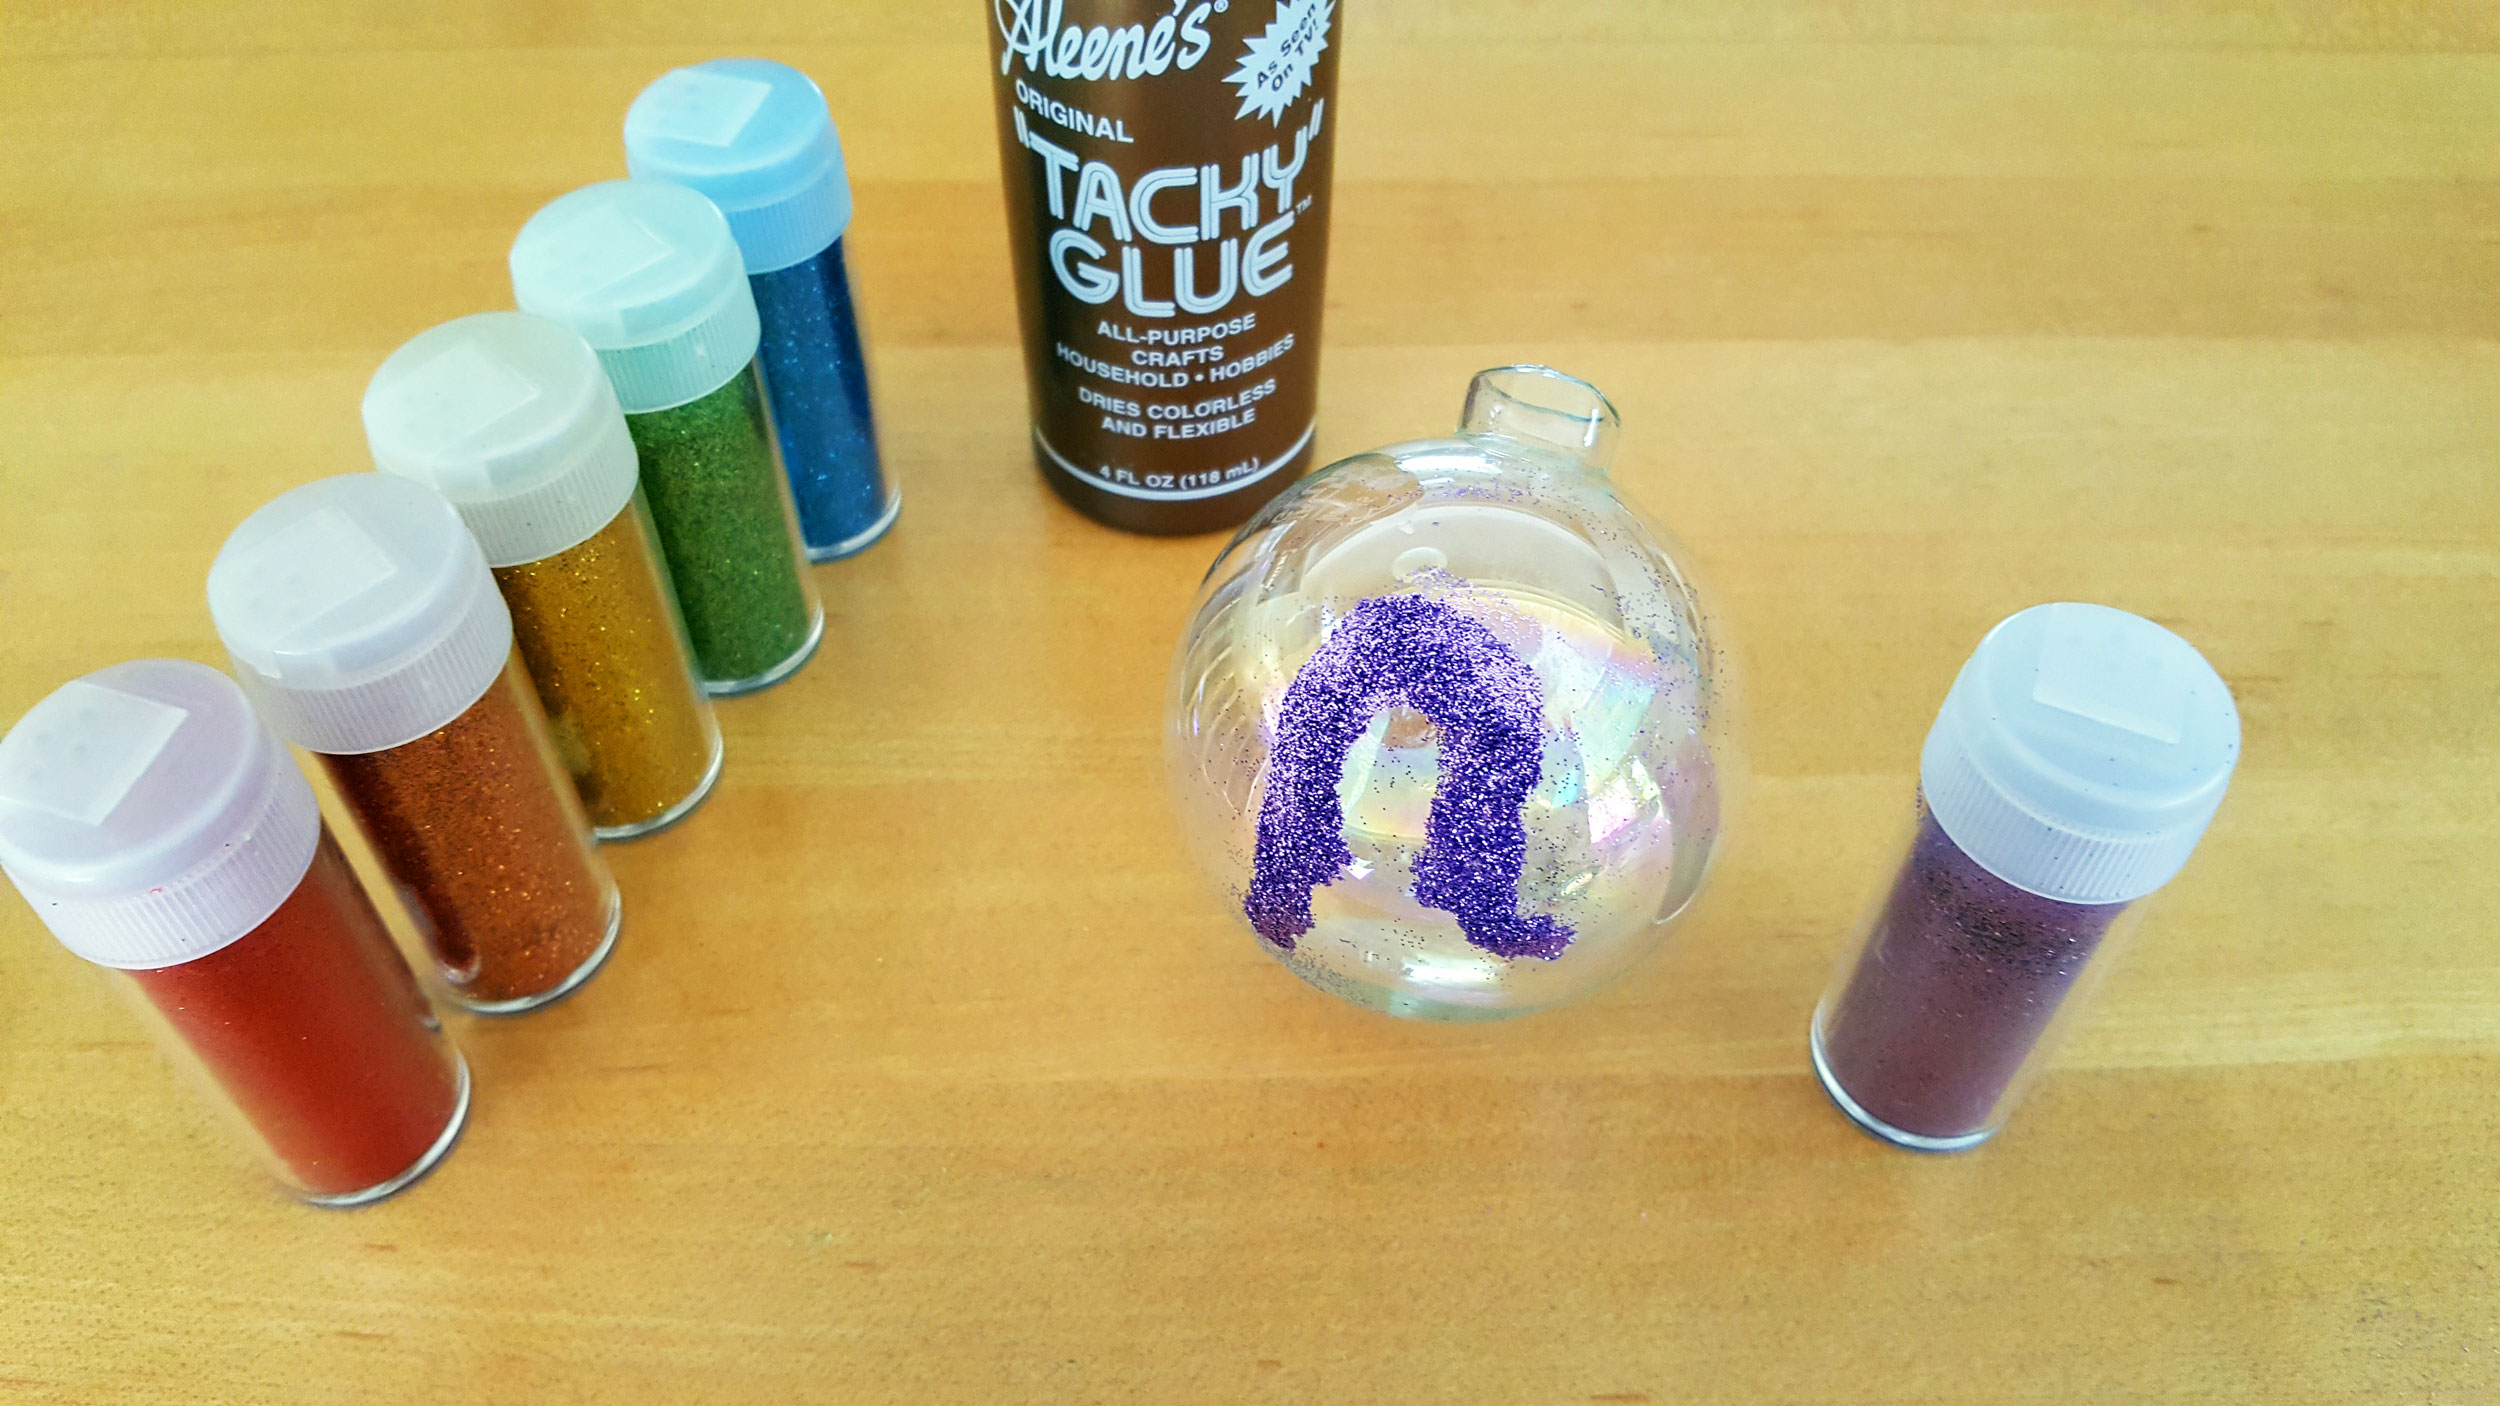 Step 1: Draw the innermost arch using a thin coat of glue to the glass ball, and then shake the purple glitter to cover the glue. | OrnamentShop.com